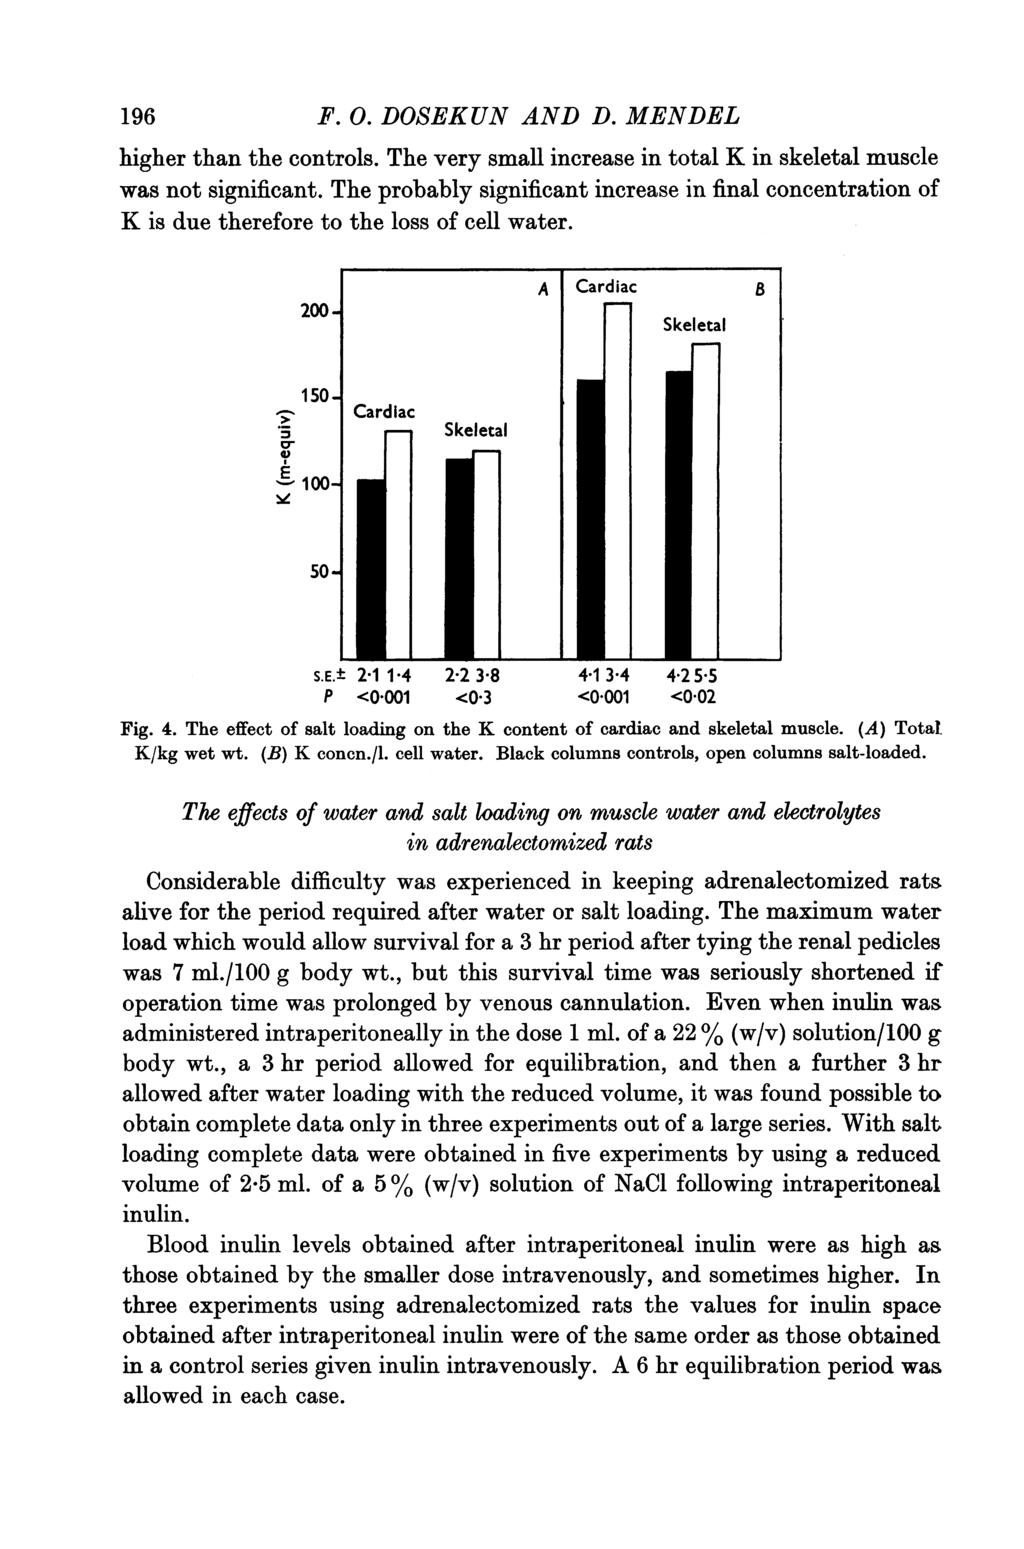 196 F. 0. DOSEKUN AND D. MENDEL higher than the controls. The very small increase in total K in skeletal muscle was not significant.